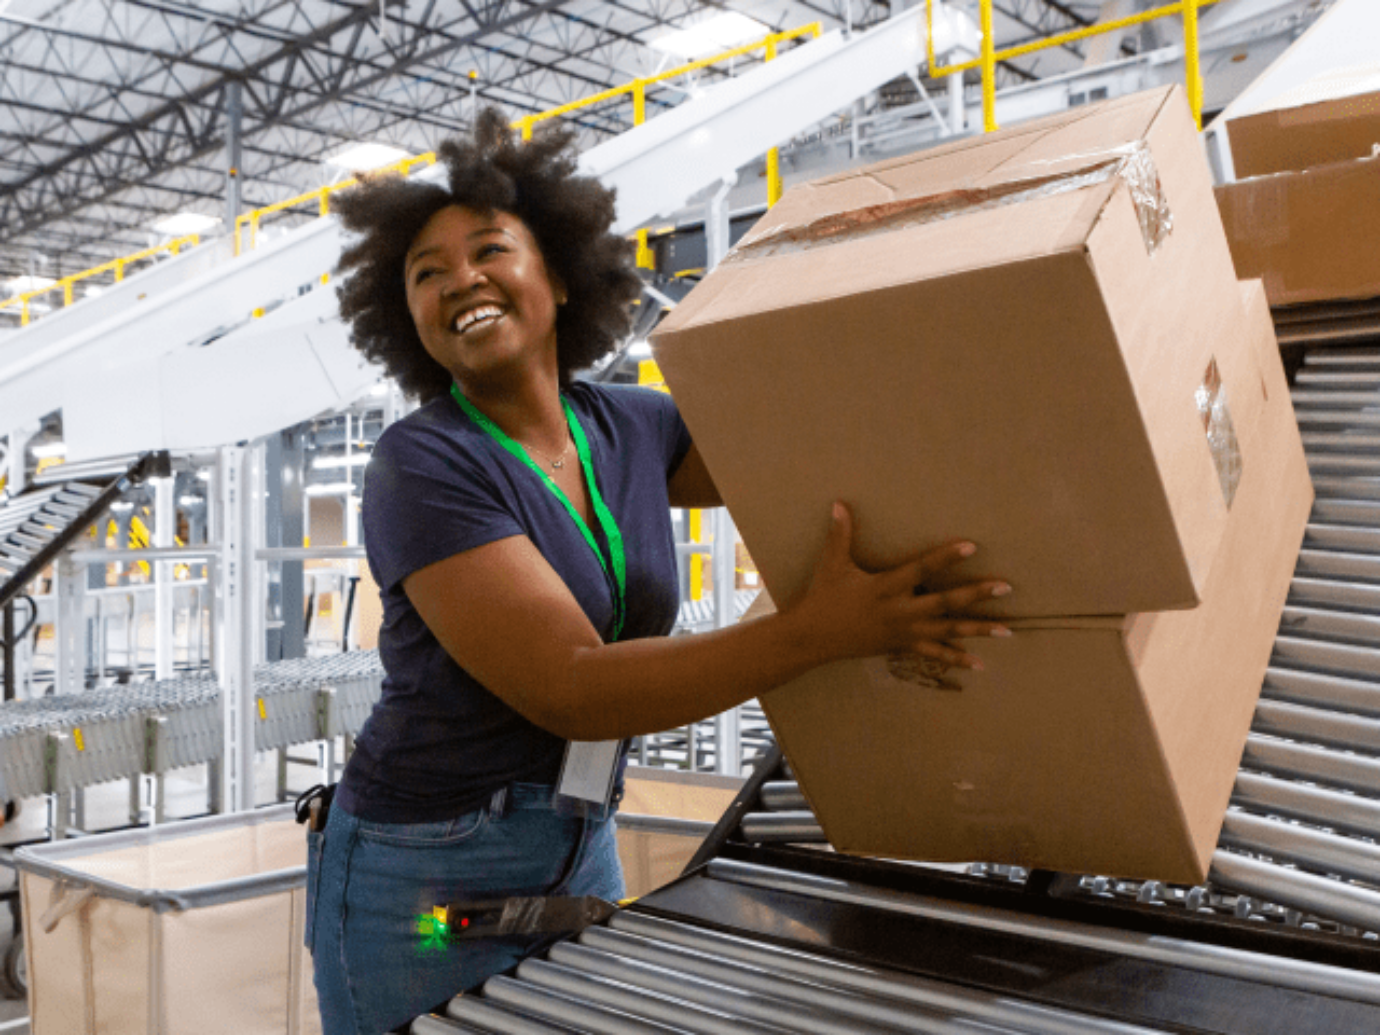 As a shelf stacker, you may have to lift heavy boxes, just like the young woman in this image.